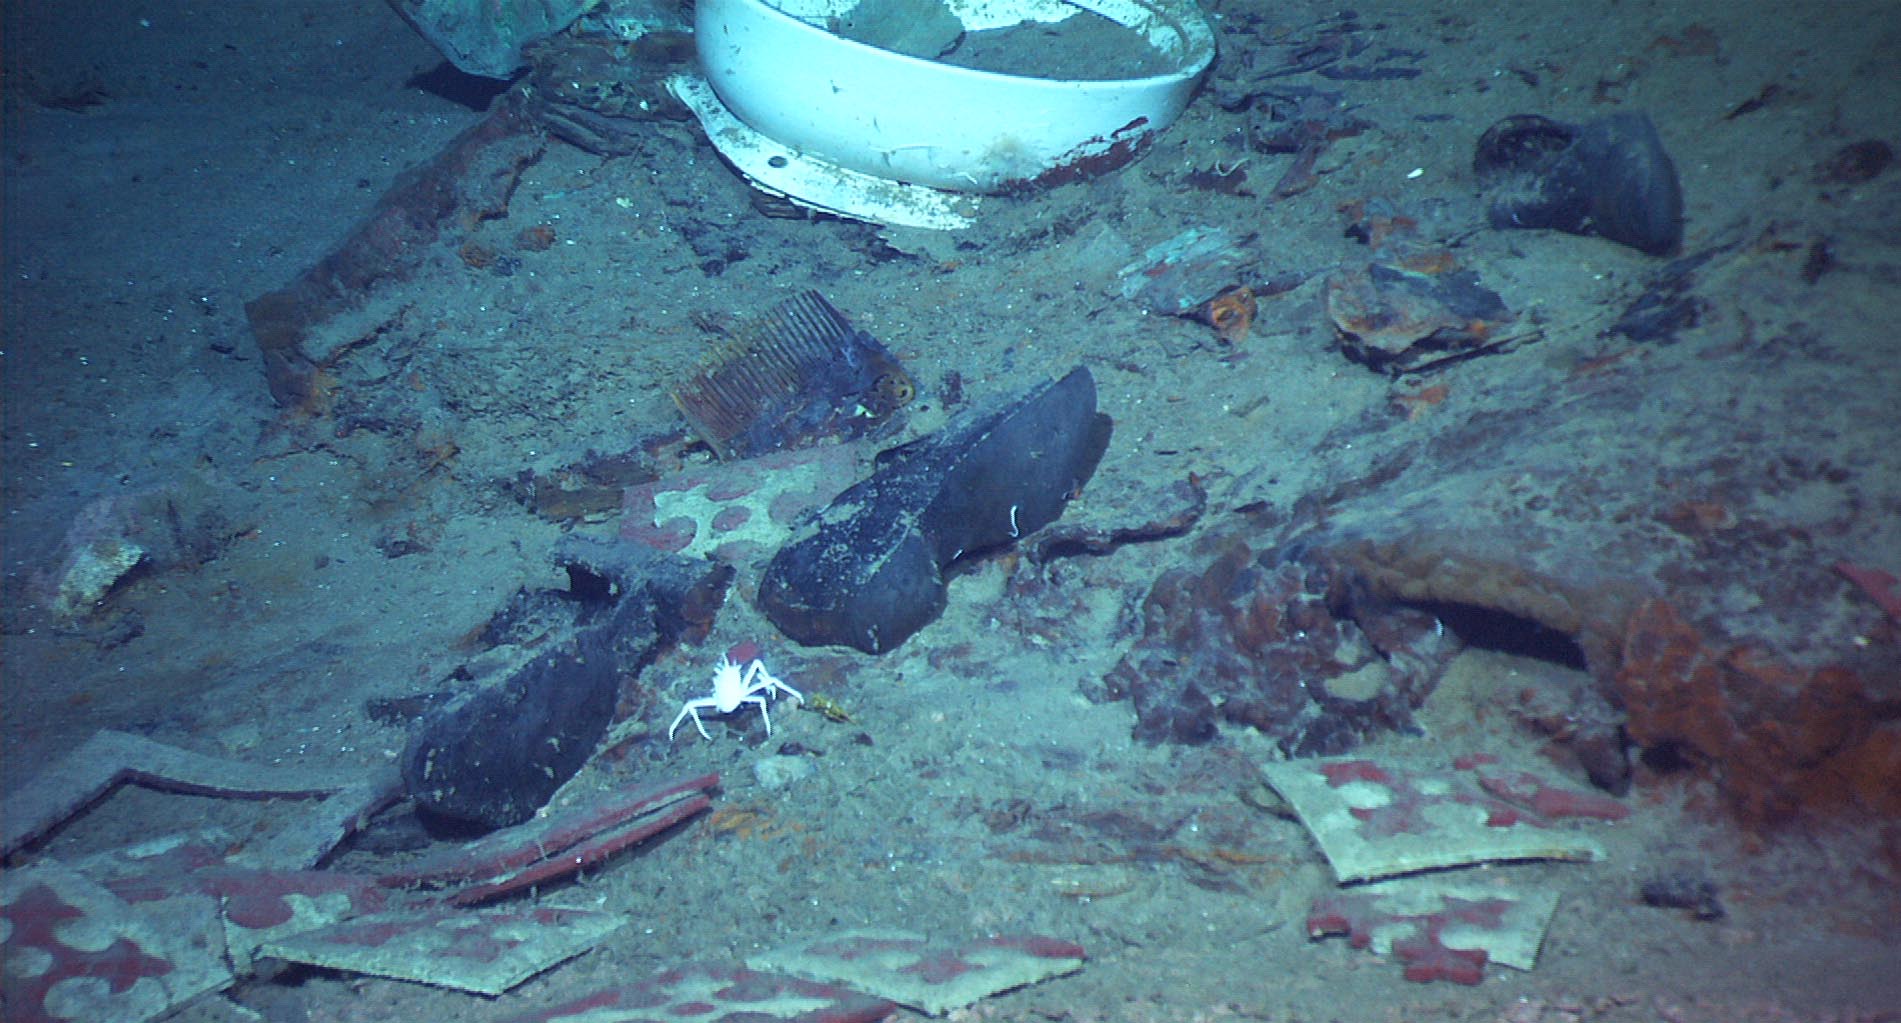 This photo provided by the Institute for Exploration, Center for Archaeological Oceanography/University of Rhode Island/NOAA Office of Ocean Exploration, shows The remains of a coat and boots, articulated in the mud on the sea bed near Titanic's stern, are suggestive evidence of where a victim of the disaster came to rest. (AP Photo/Institute for Exploration, Center for Archaeological Oceanography/University of Rhode Island/NOAA Office of Ocean Exploration) Photo taken April 14, 2012